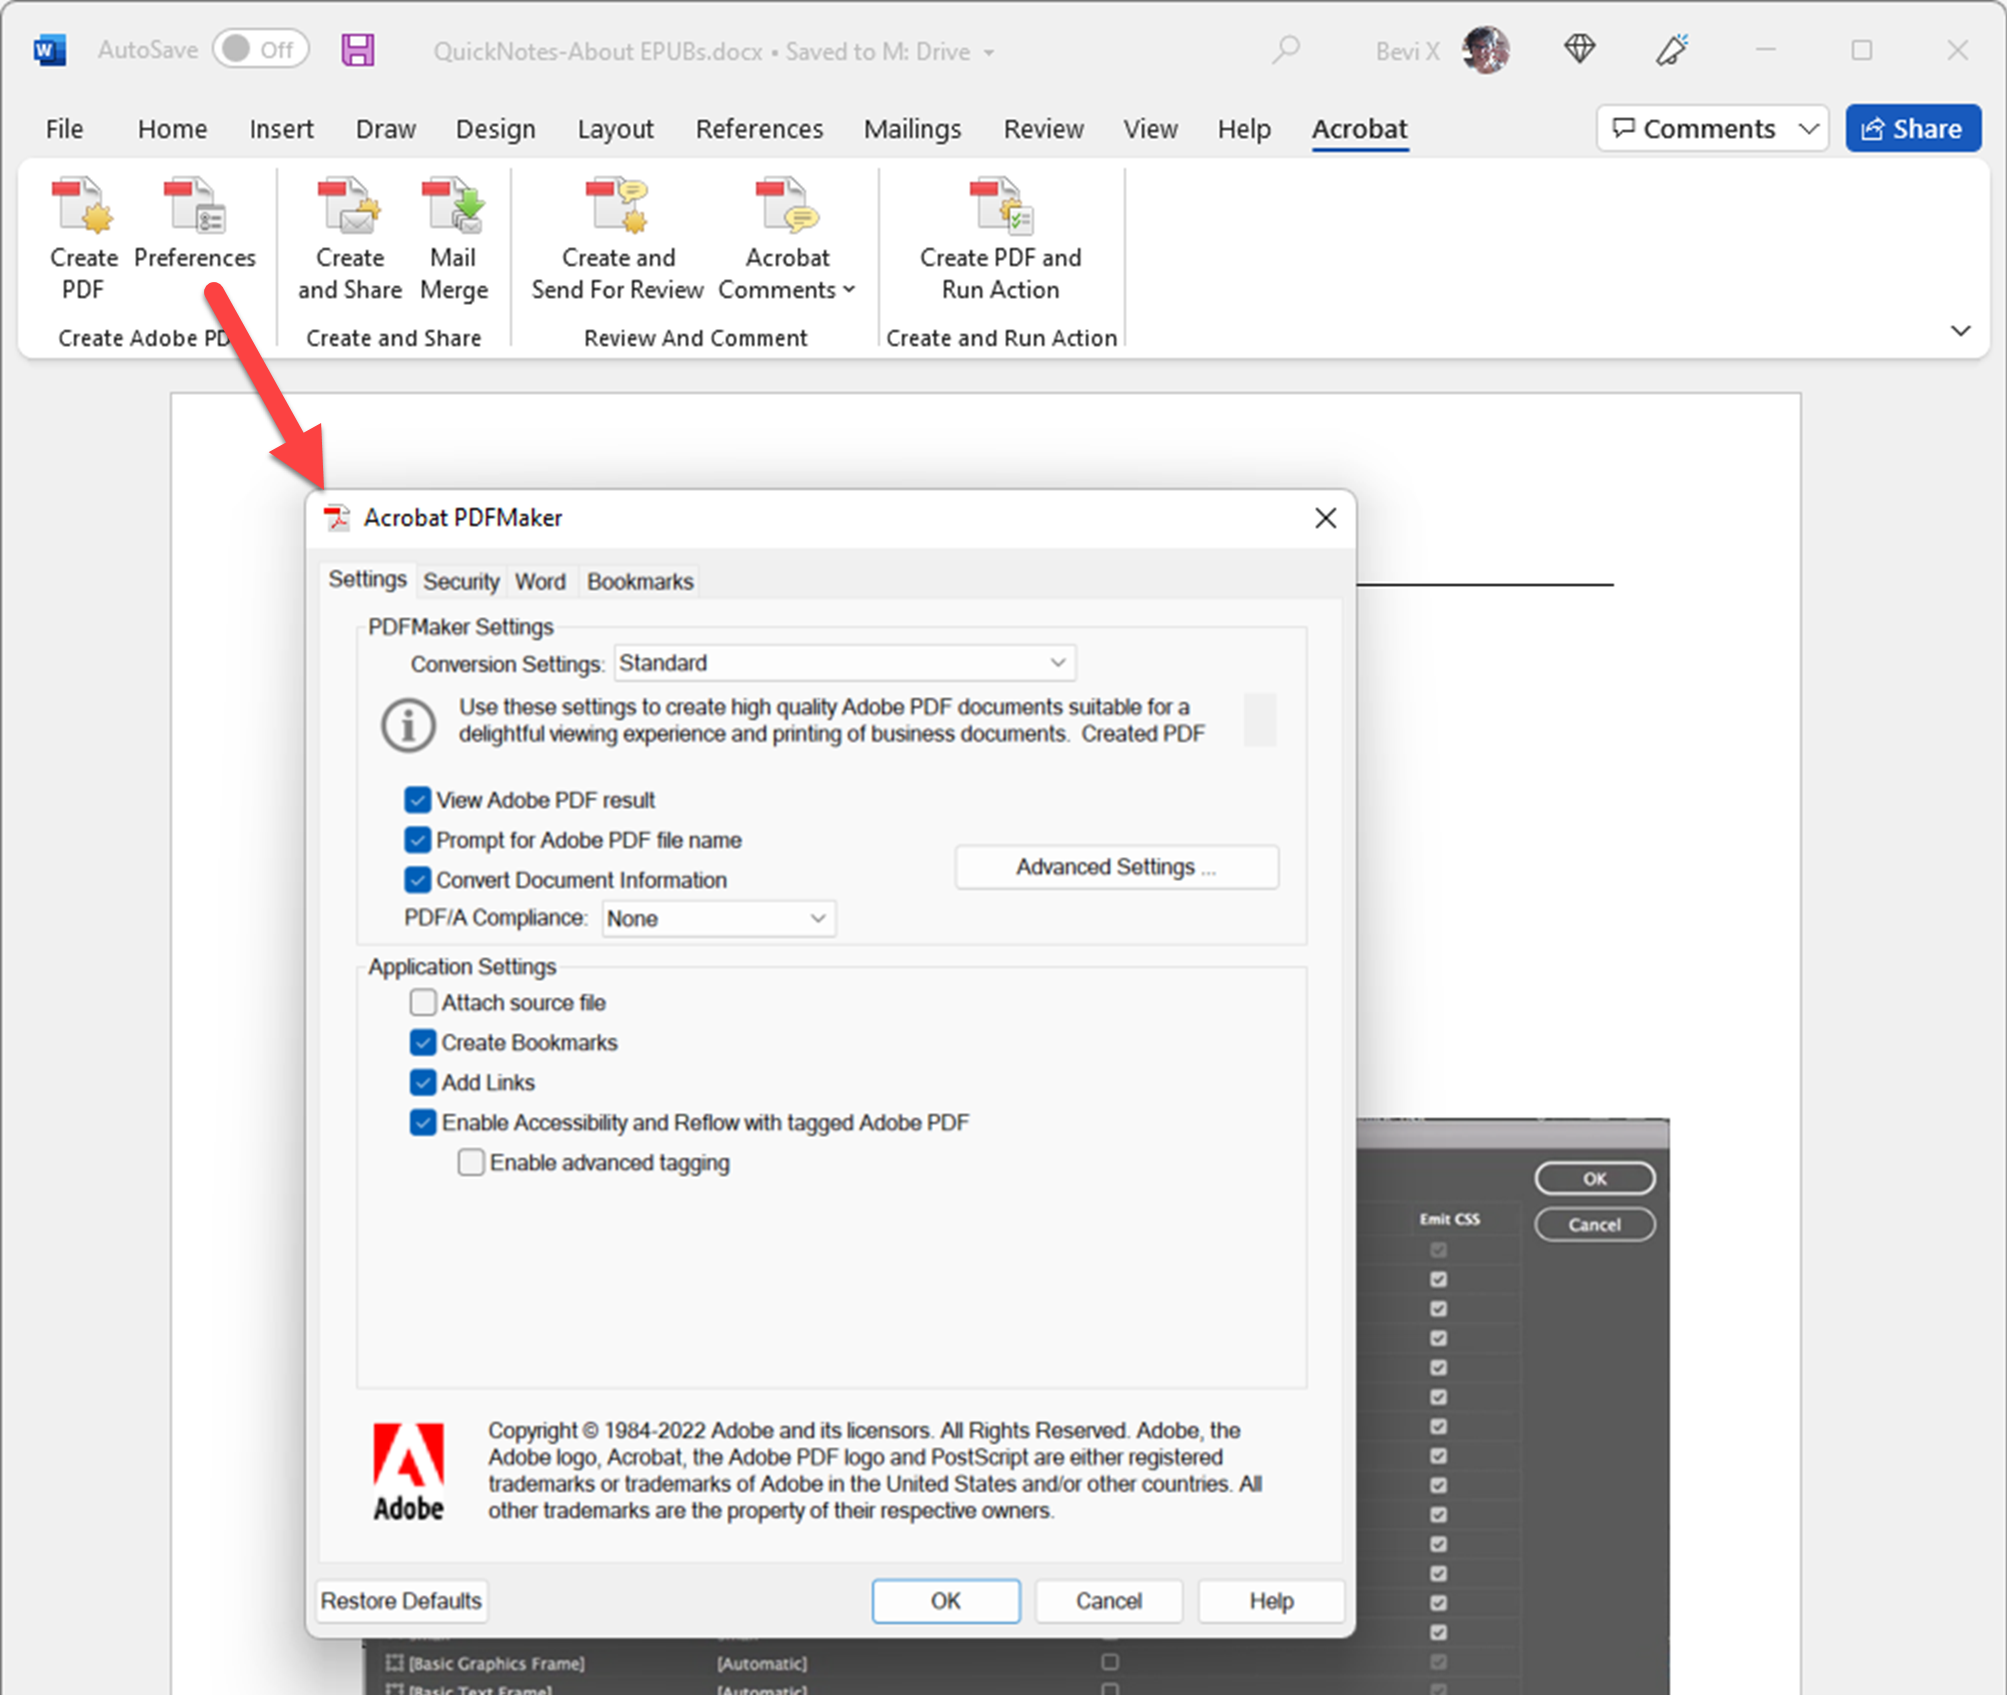 Preferences dialogue box number 1. Check these options: View Adobe PDF result. Prompt for Adobe PDF file name. Convert Document Information. Create Bookmarks. Add Links. Enable Accessibility and Reflow with tagged Adobe PDF.